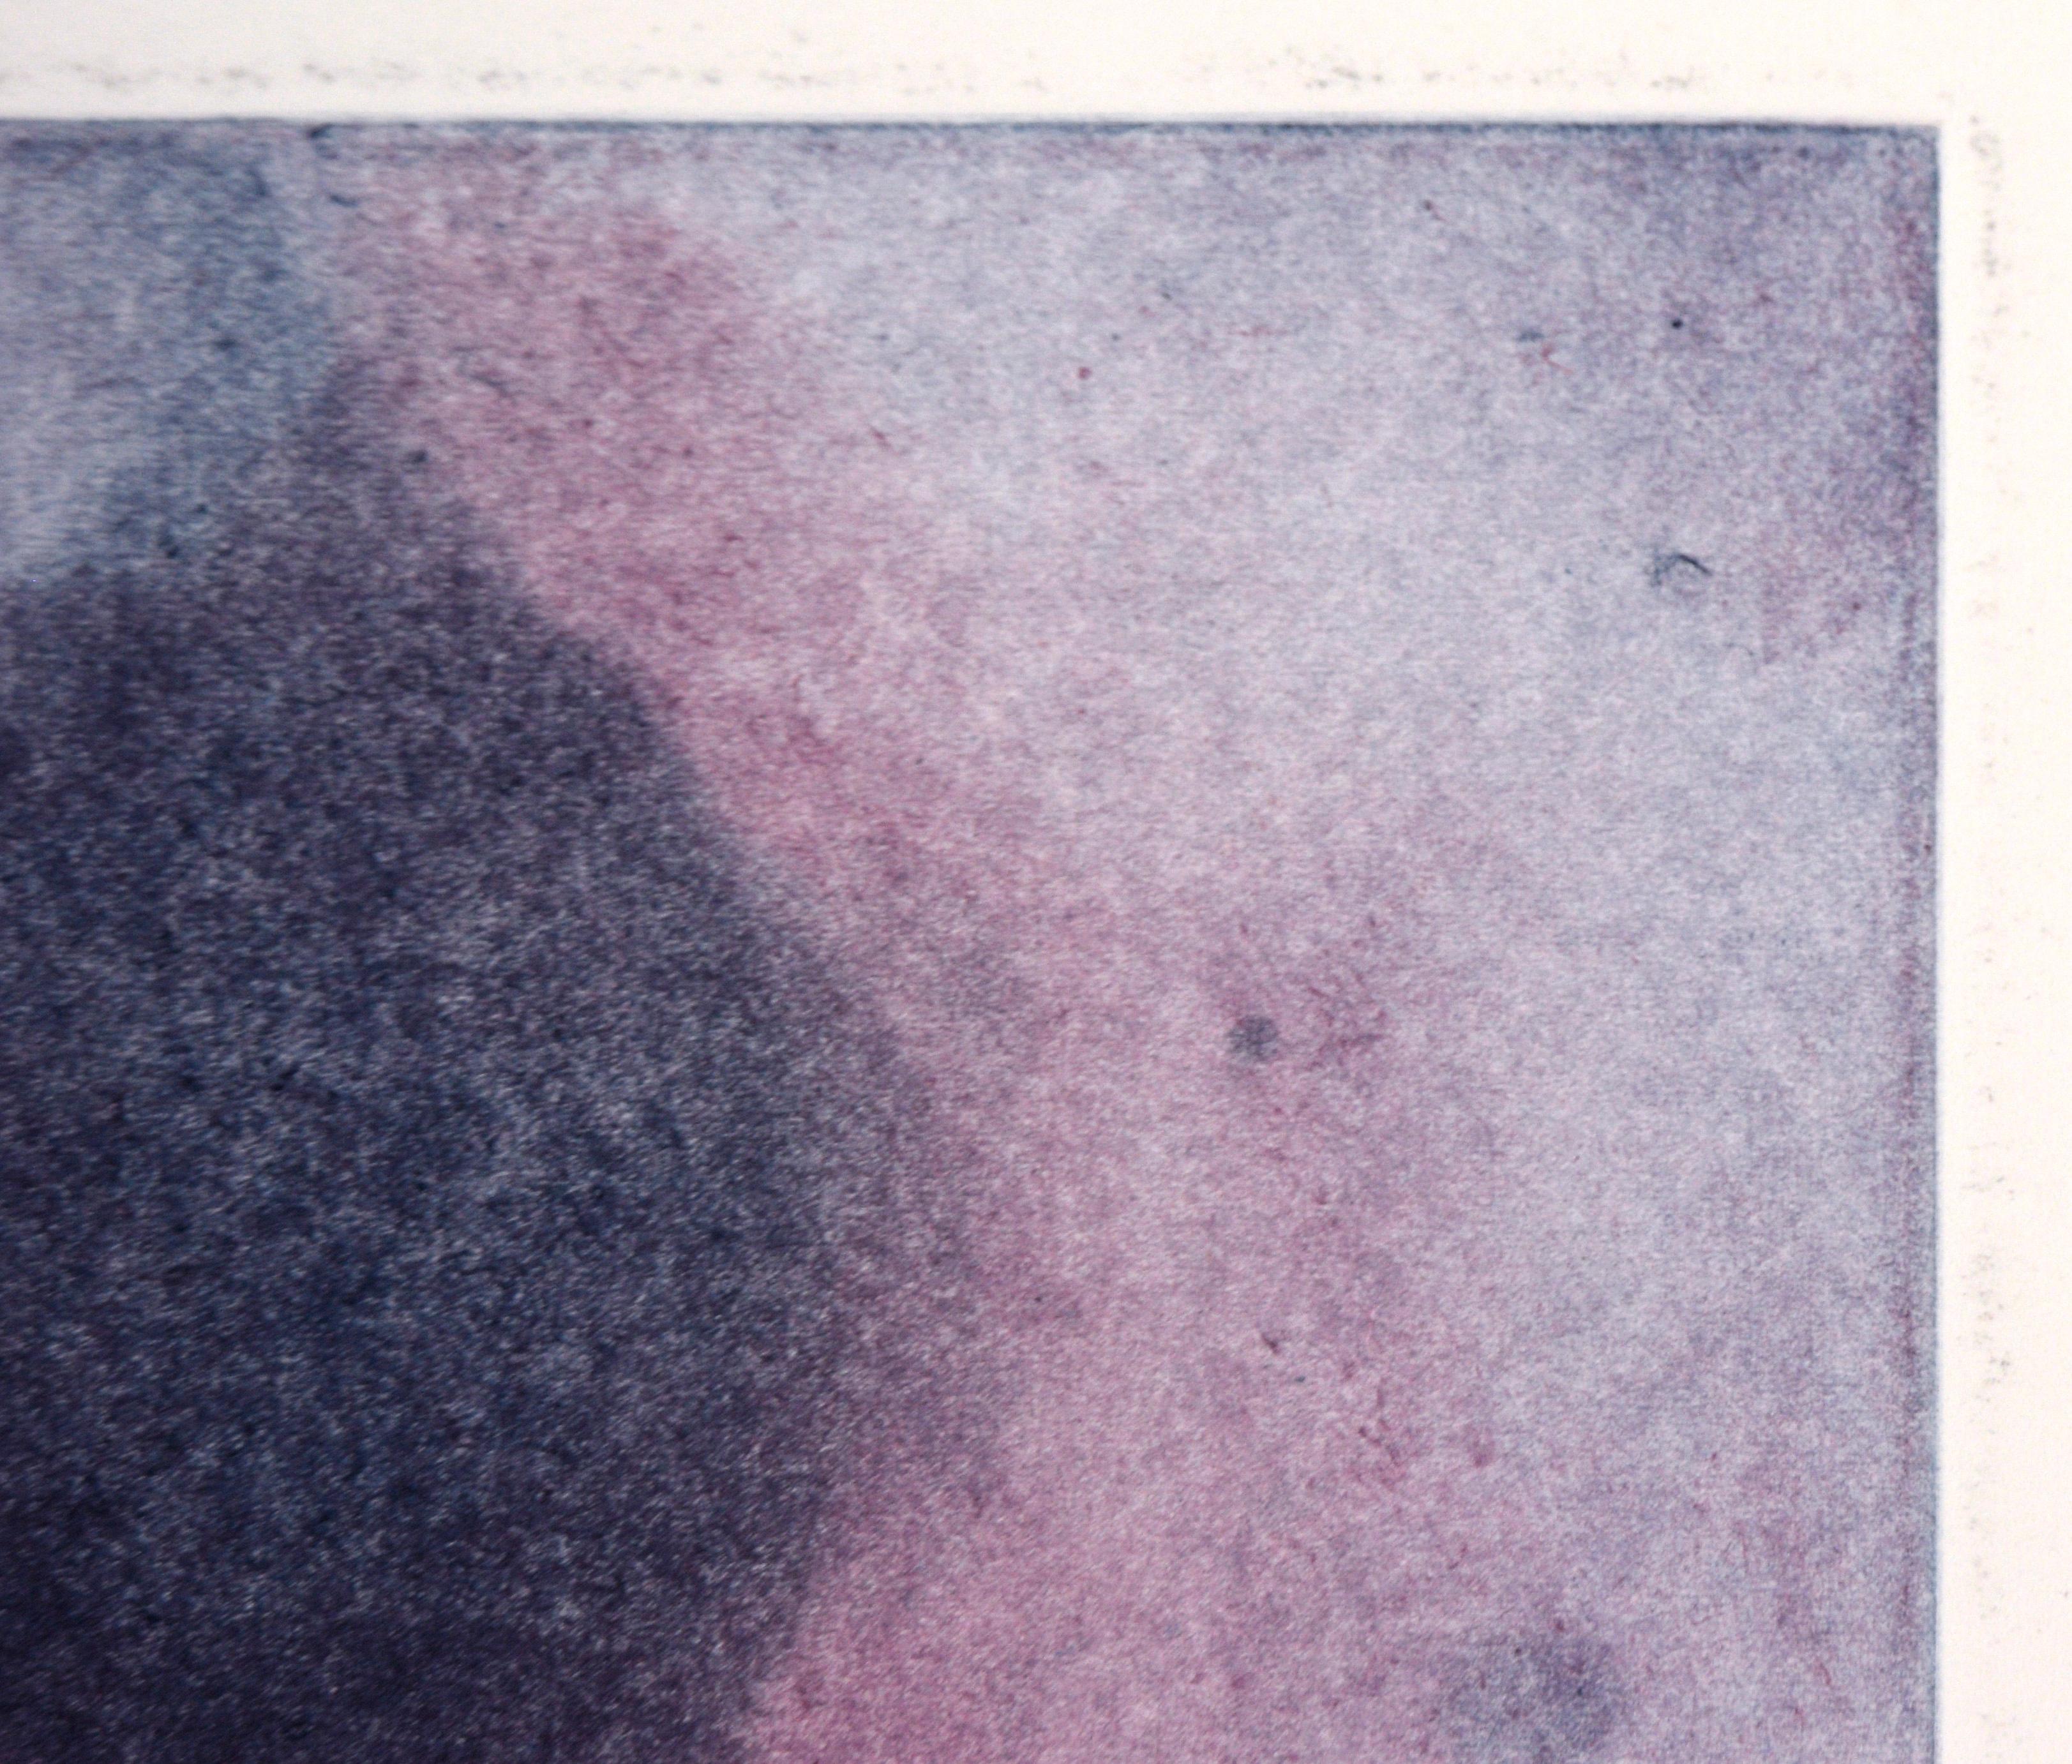 Lavender Nebula - Transfer Monotype in Oil on Paper

Original hand painted and transfer monotype painting by California artist Heather Speck (American, 20th C). Layers of blues, purples, and magenta create an abstract shape resembling a nebula or